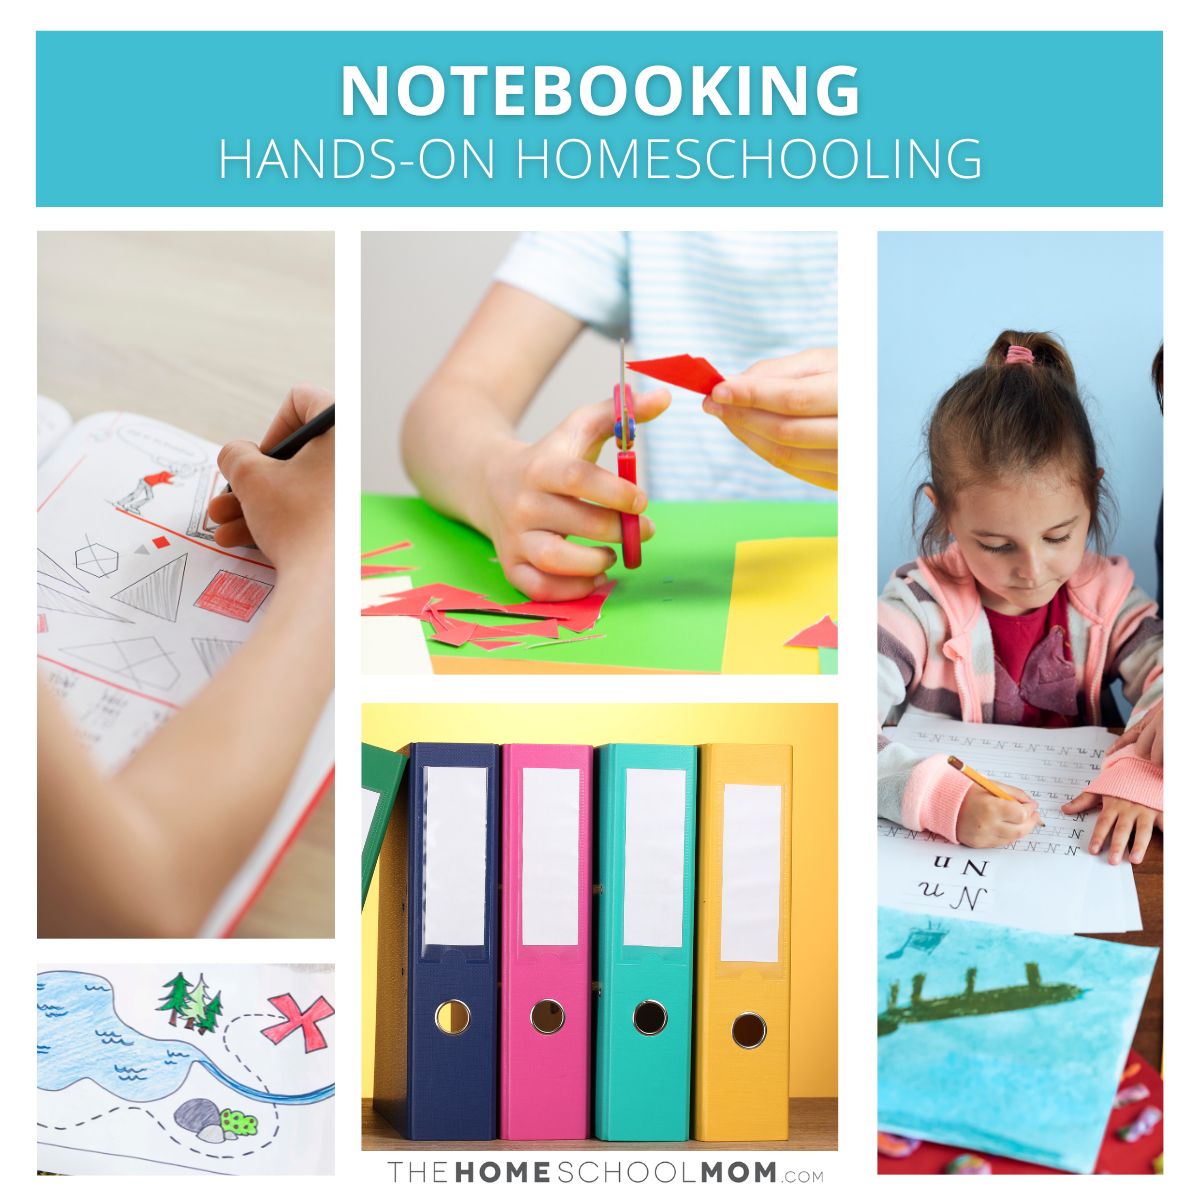 Composite image depicting child's notebooking including maps, artwork, letterwork, and workbook pages.